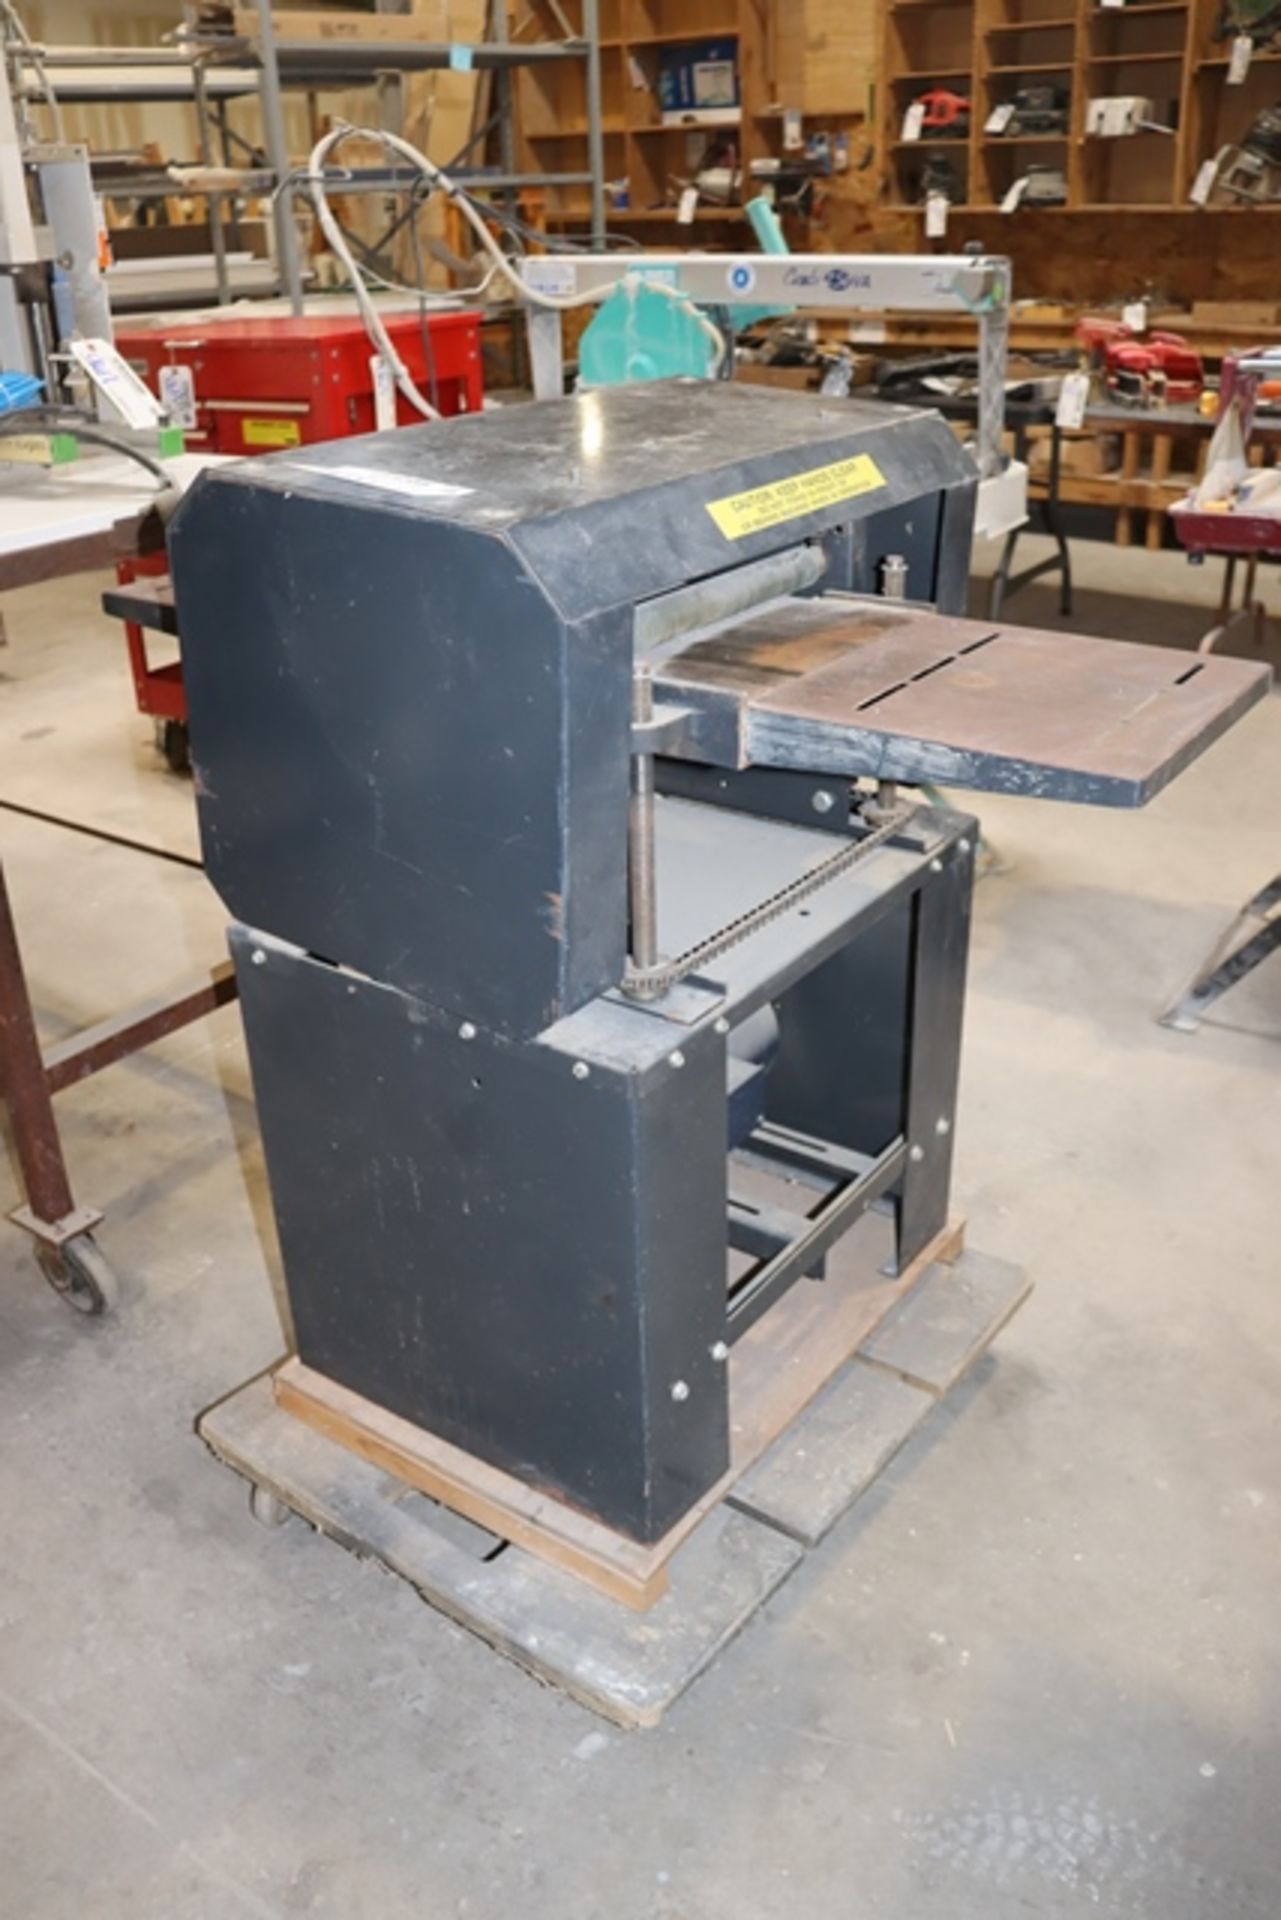 Woodmaster Tools Inc model W-712 planer - top needs bolted back on - Image 2 of 5